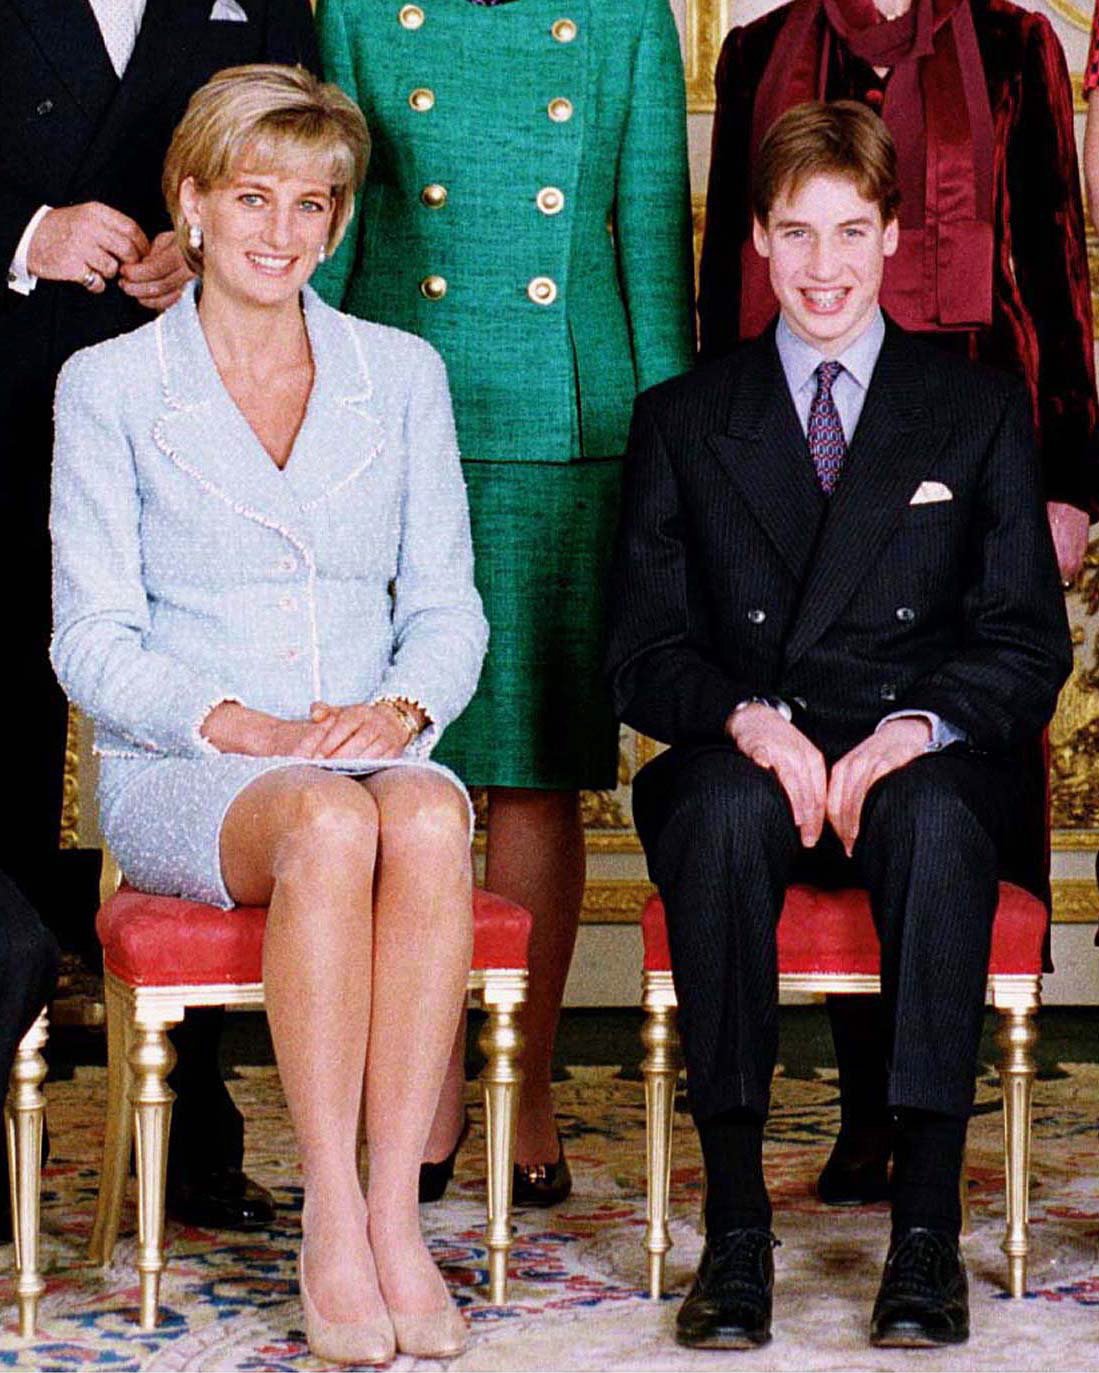 Prince William at confirmation with King Charles and Princess Diana at Windsor Castle, Windsor, United Kingdom. | Source: Getty Images